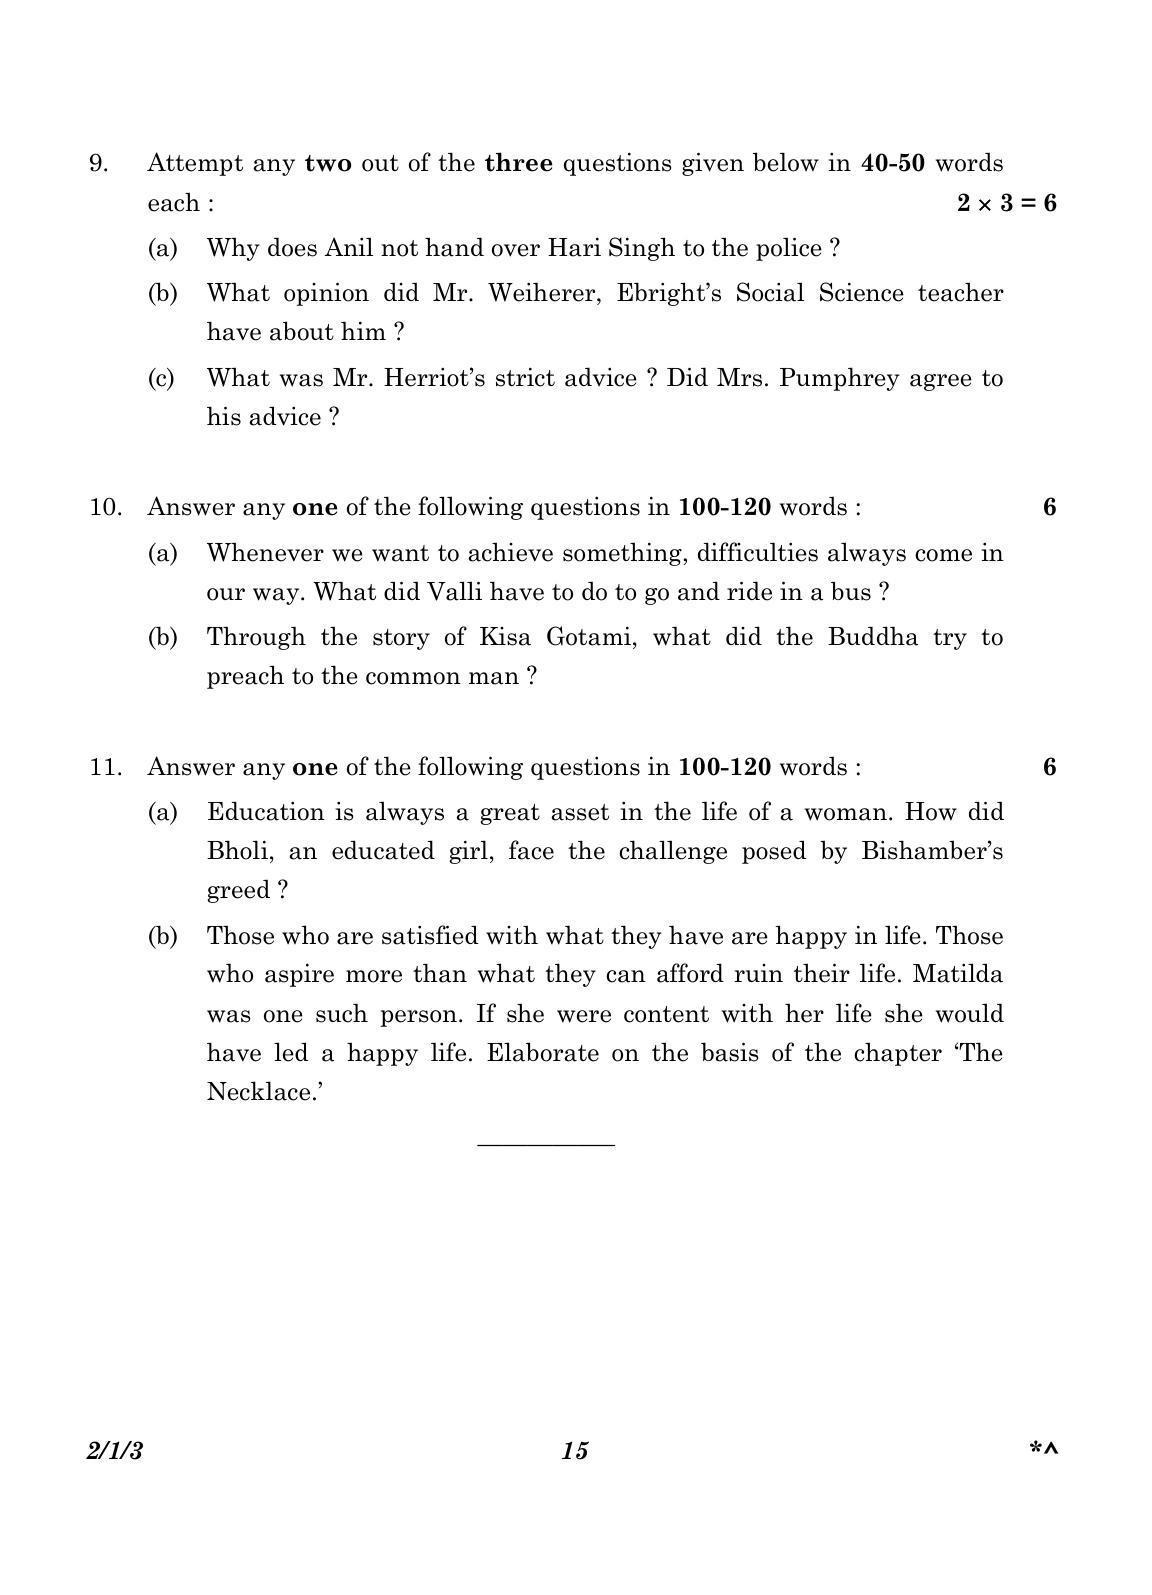 CBSE Class 10 2-1-3_English Language And Literature 2023 Question Paper - Page 15